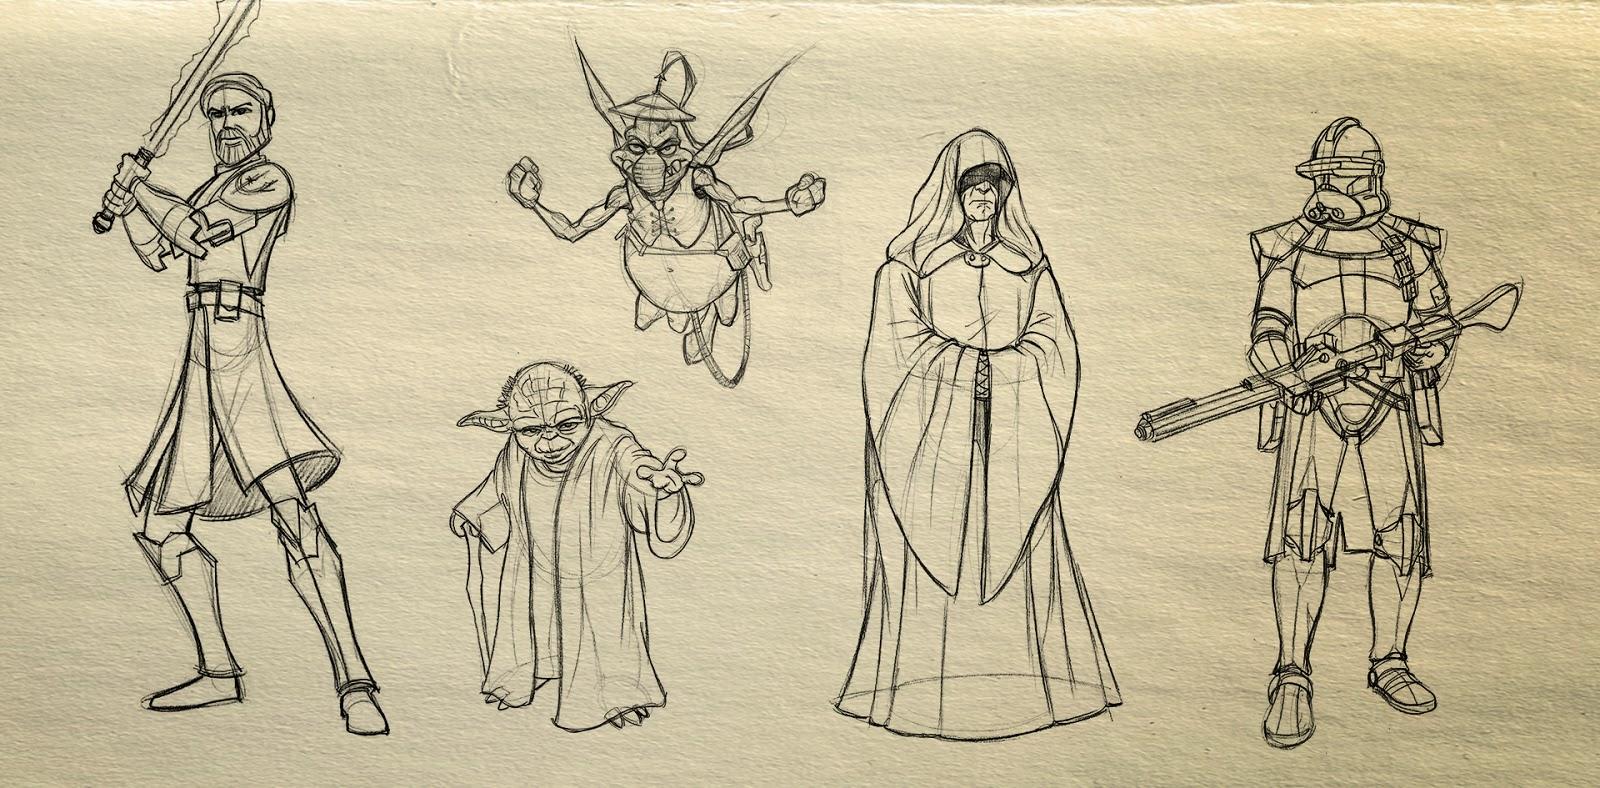 Star Wars (Cancelled Kingdom Hearts game concept art)